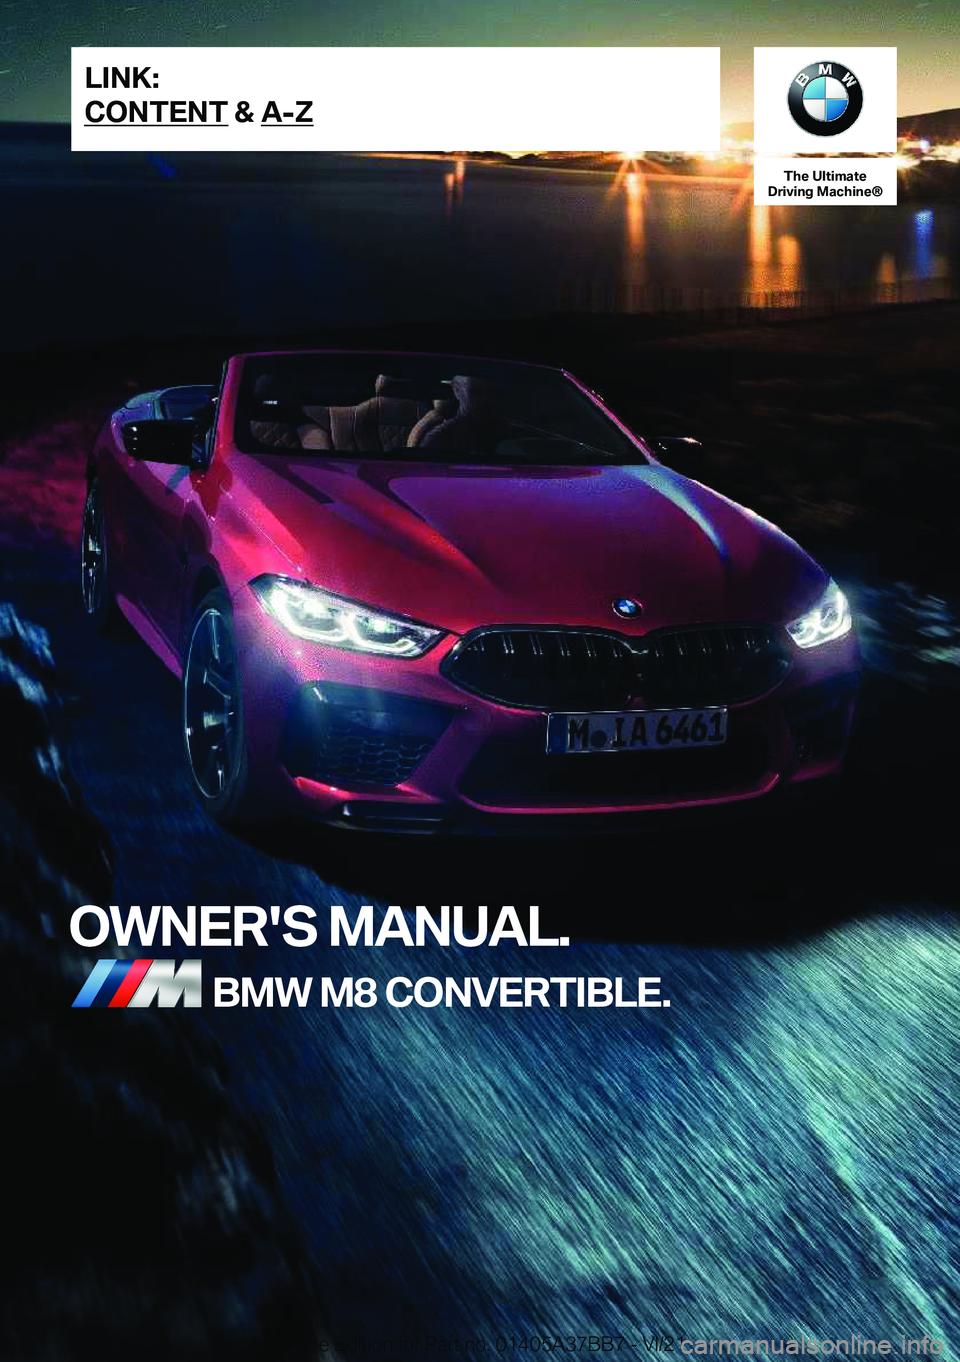 BMW M8 2022  Owners Manual �T�h�e��U�l�t�i�m�a�t�e
�D�r�i�v�i�n�g��M�a�c�h�i�n�e�n
�O�W�N�E�R�'�S��M�A�N�U�A�L�.�B�M�W��M�8��C�O�N�V�E�R�T�I�B�L�E�.�L�I�N�K�:
�C�O�N�T�E�N�T��&��A�-�Z�O�n�l�i�n�e��E�d�i�t�i�o�n��f�